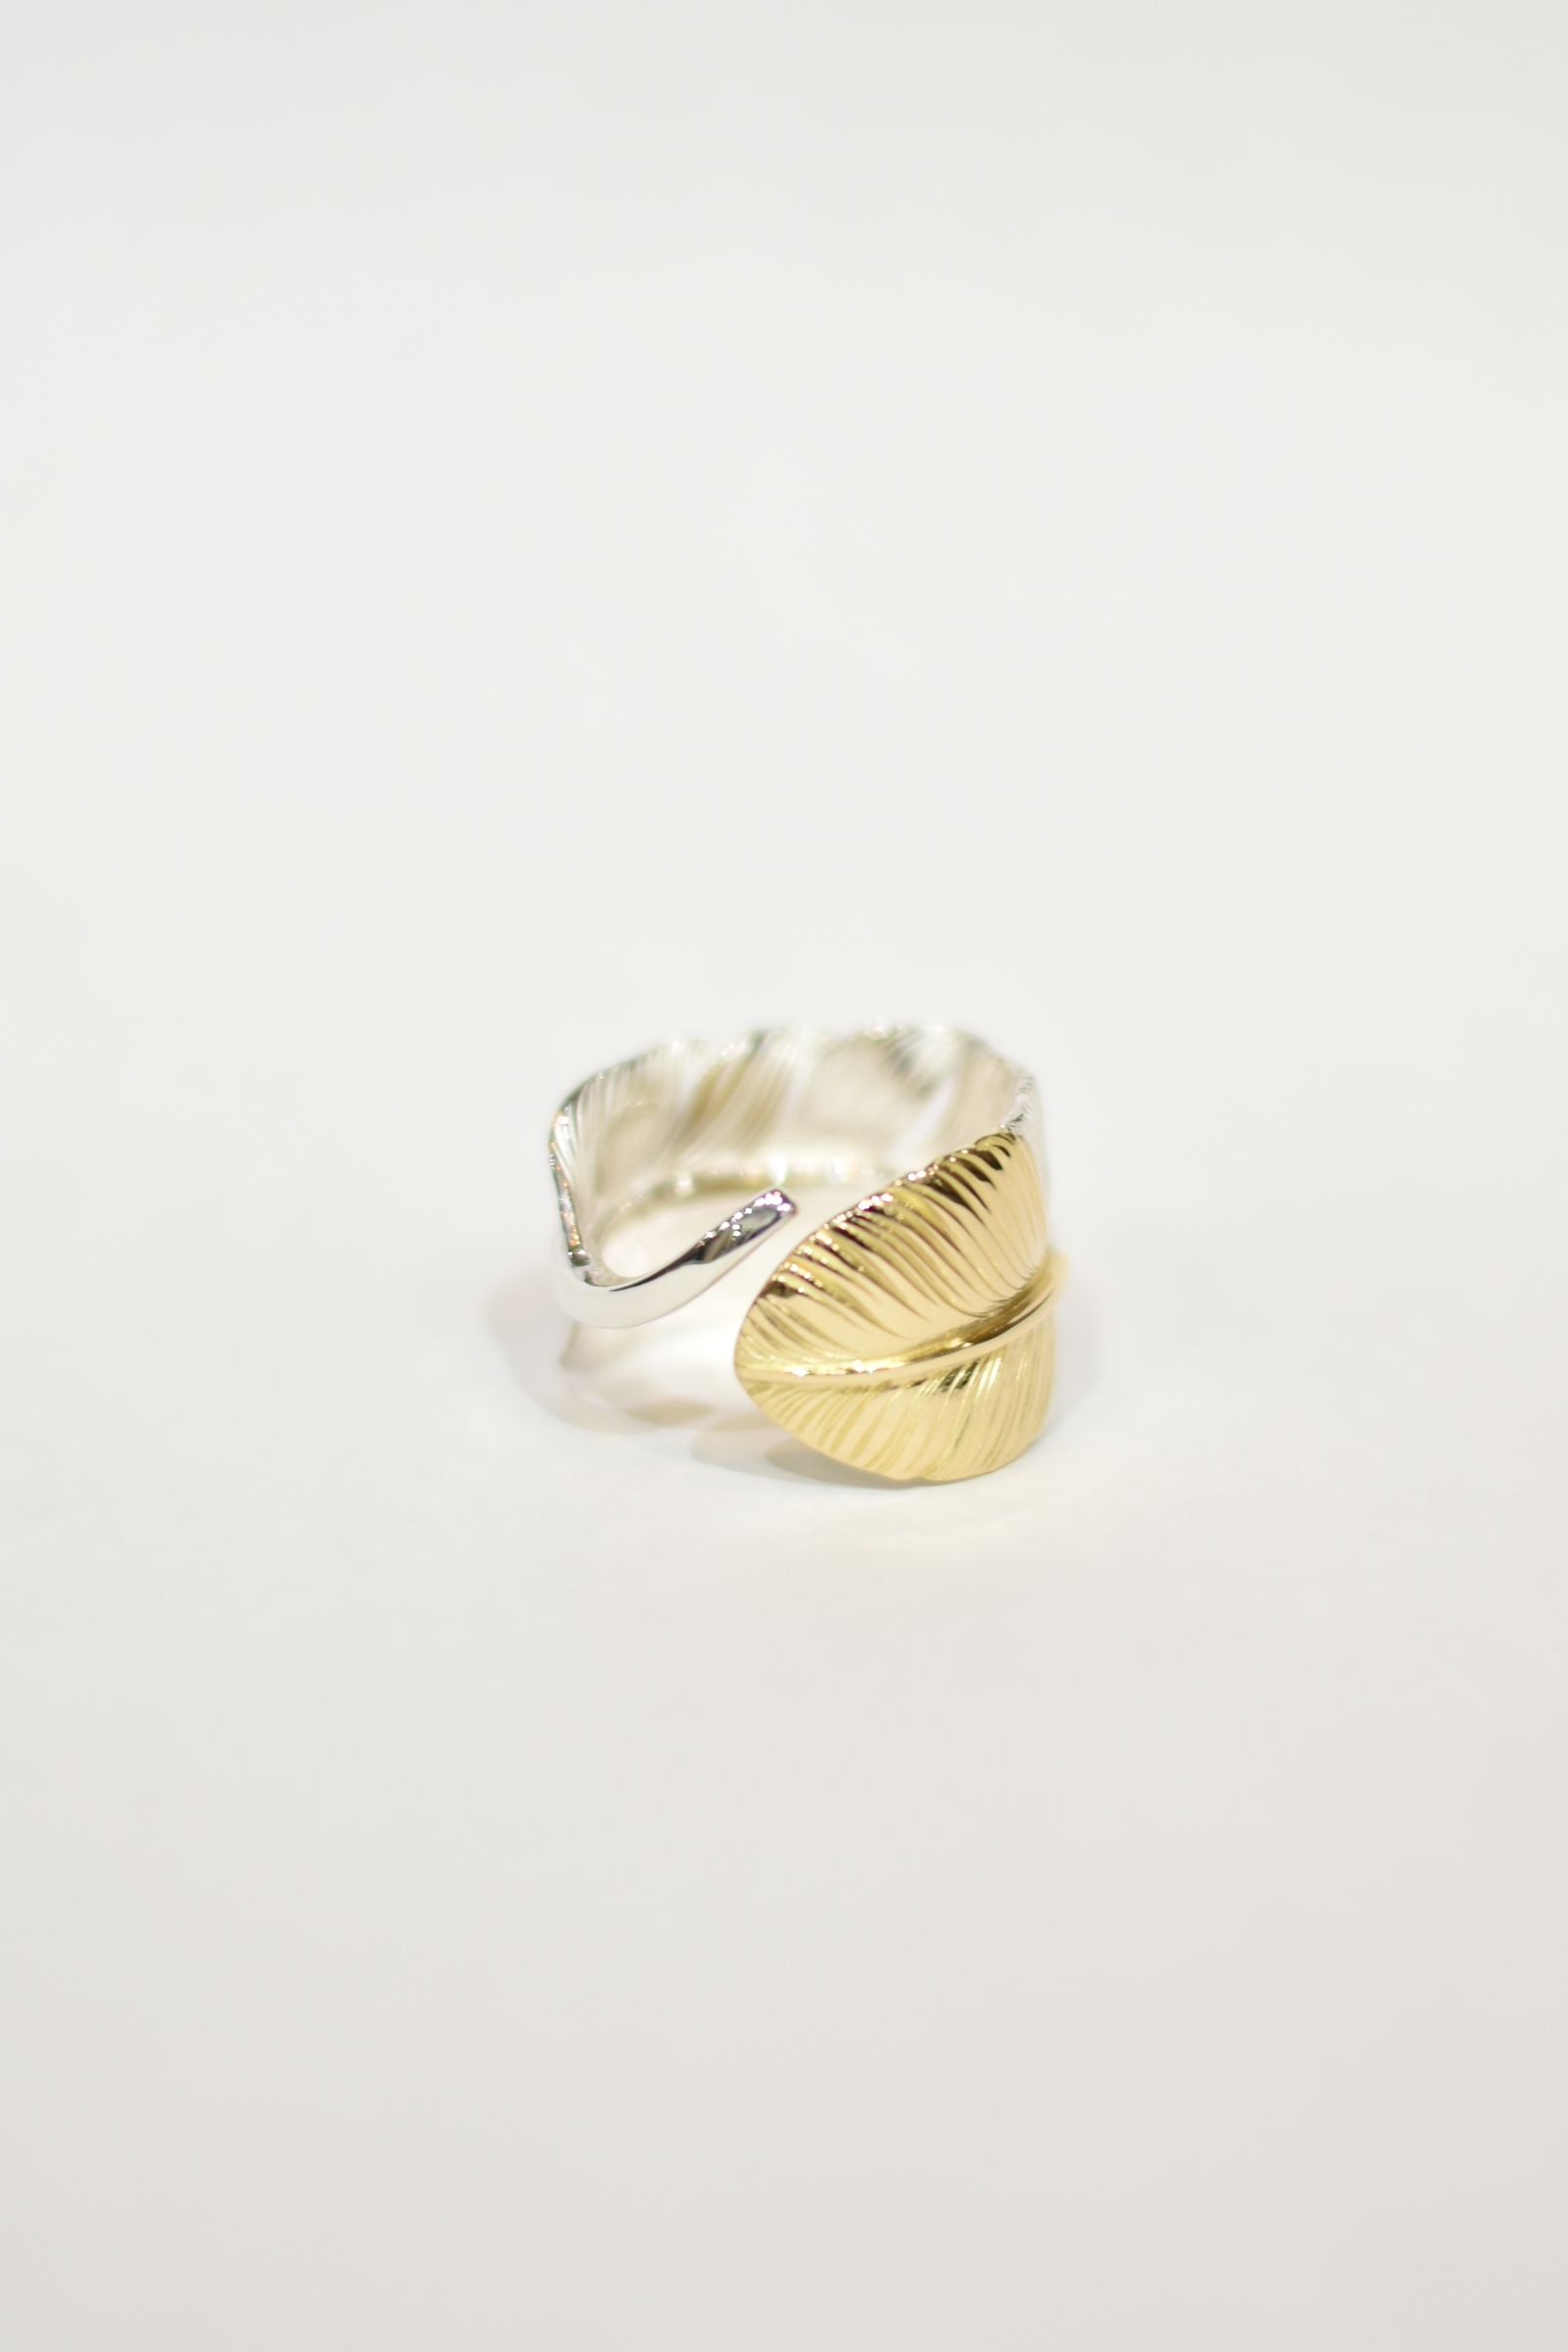 TARO WASHIMI - L old feather K18 top ring 02 | chord online store